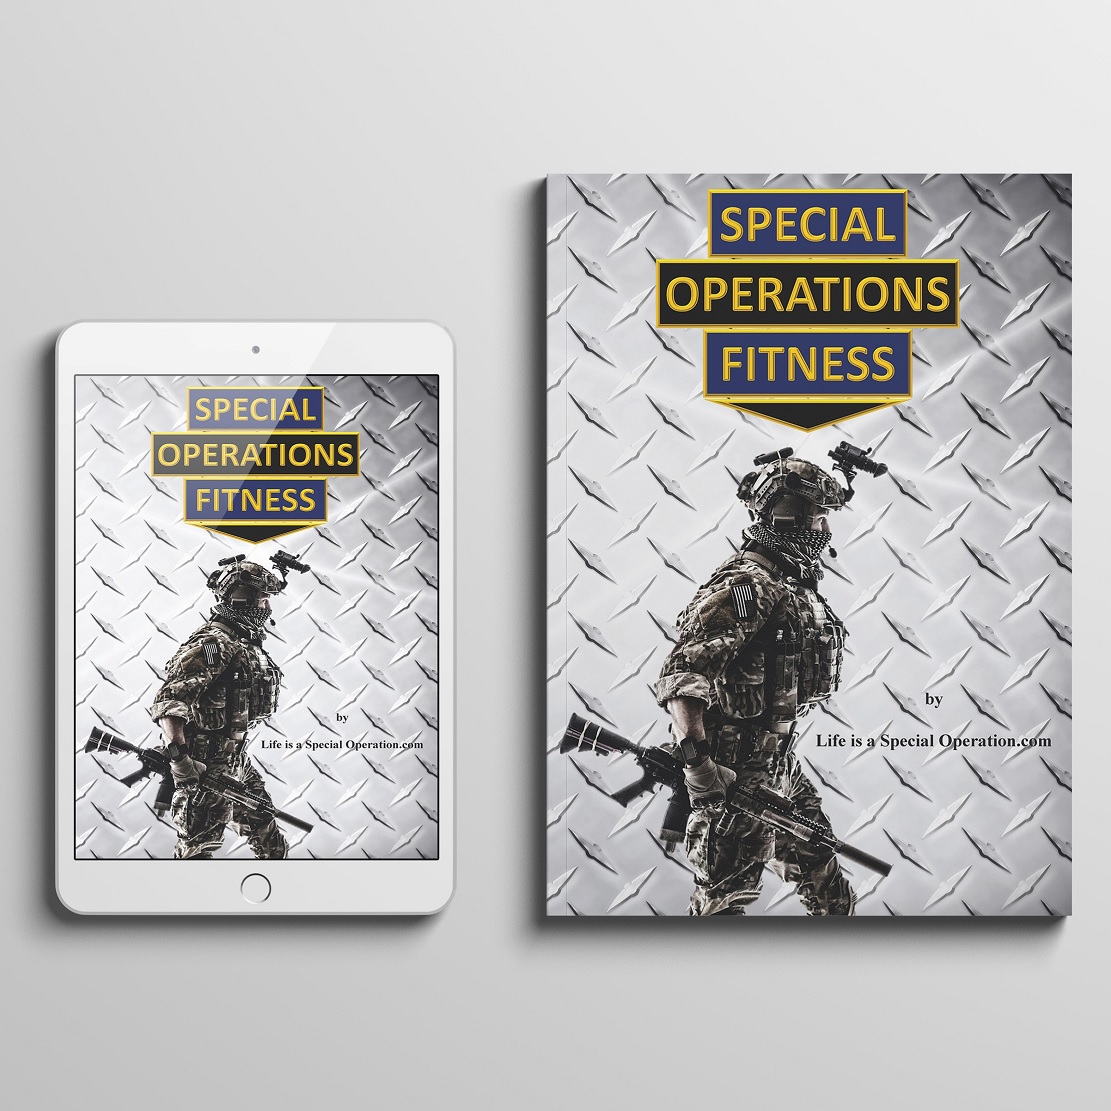 Go from Zero to Hero in 12 Weeks Expand your Fitness Repertoire with Dozens of New Workouts Designed to Challenge both Novices & Experienced Athletes Perfect for Civilians & Future Members of the Military Nothing to Lose (Except Body Fat) - Money Back Guarantee Learn from a World Class Competitor (Green Beret, Ranger, Combat Diver)